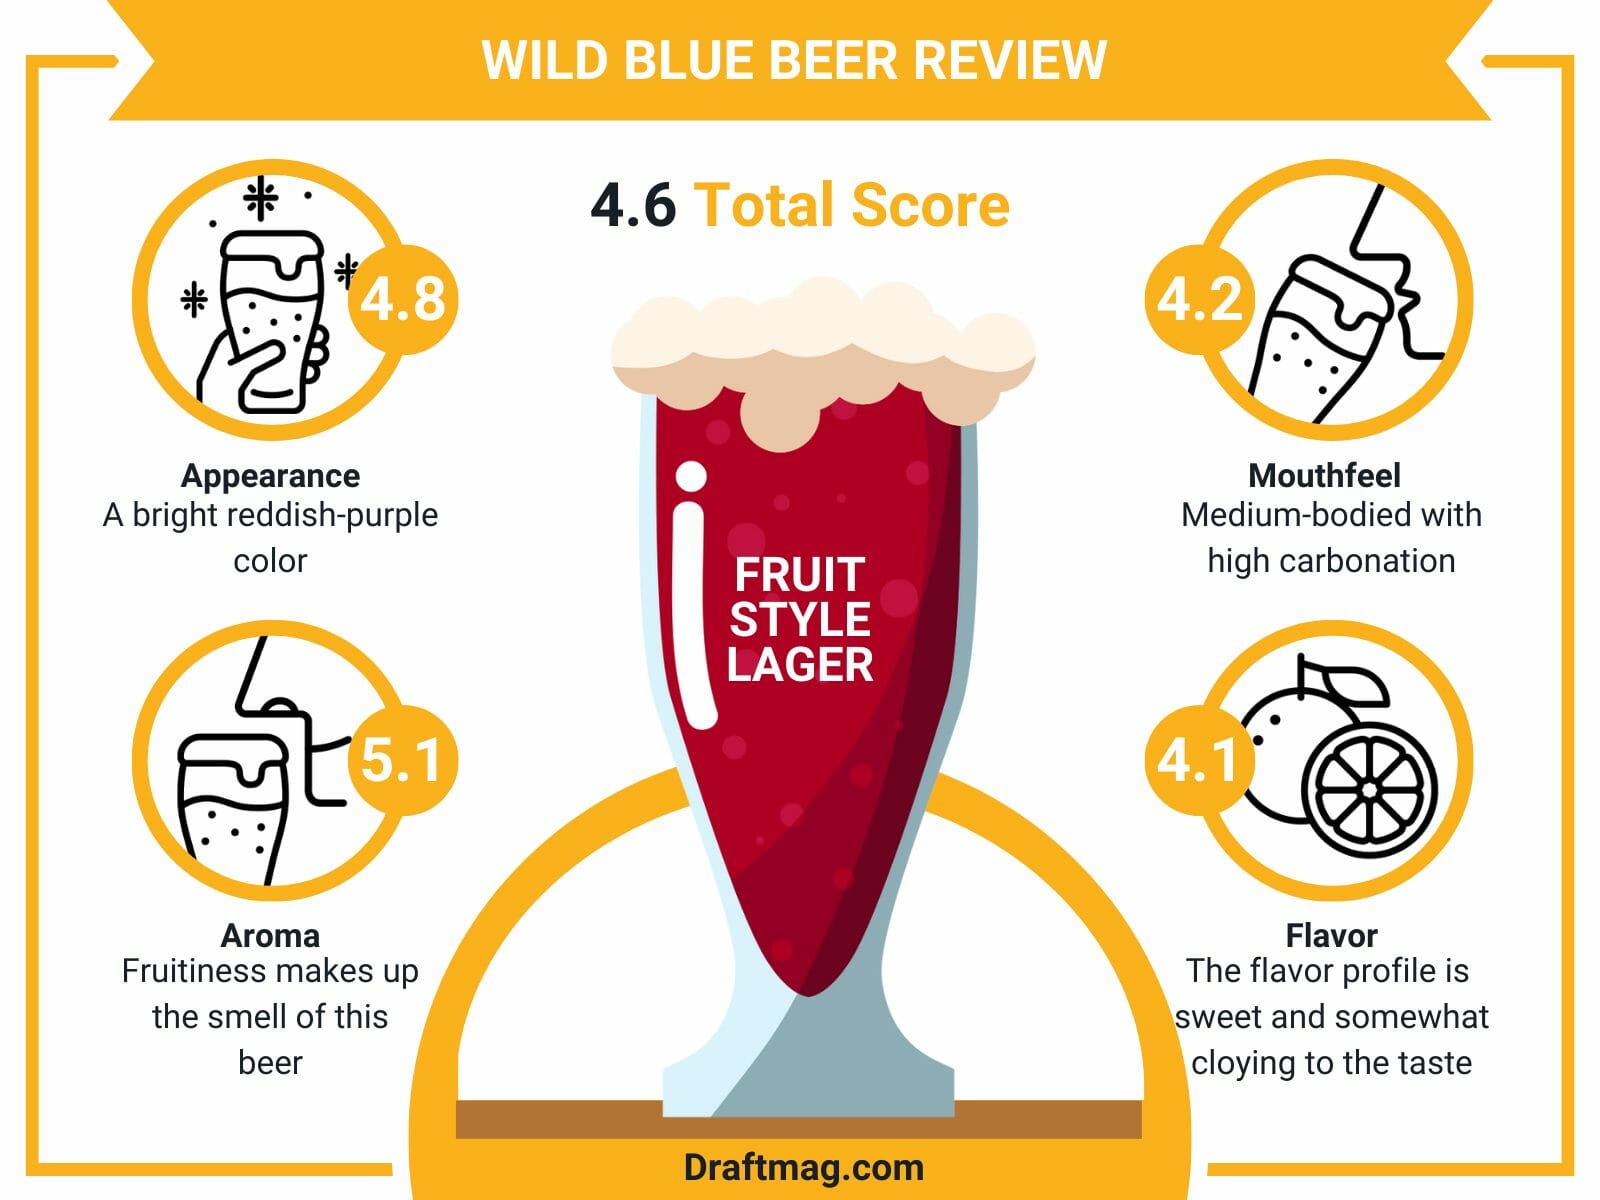 Wild blue beer review infographic